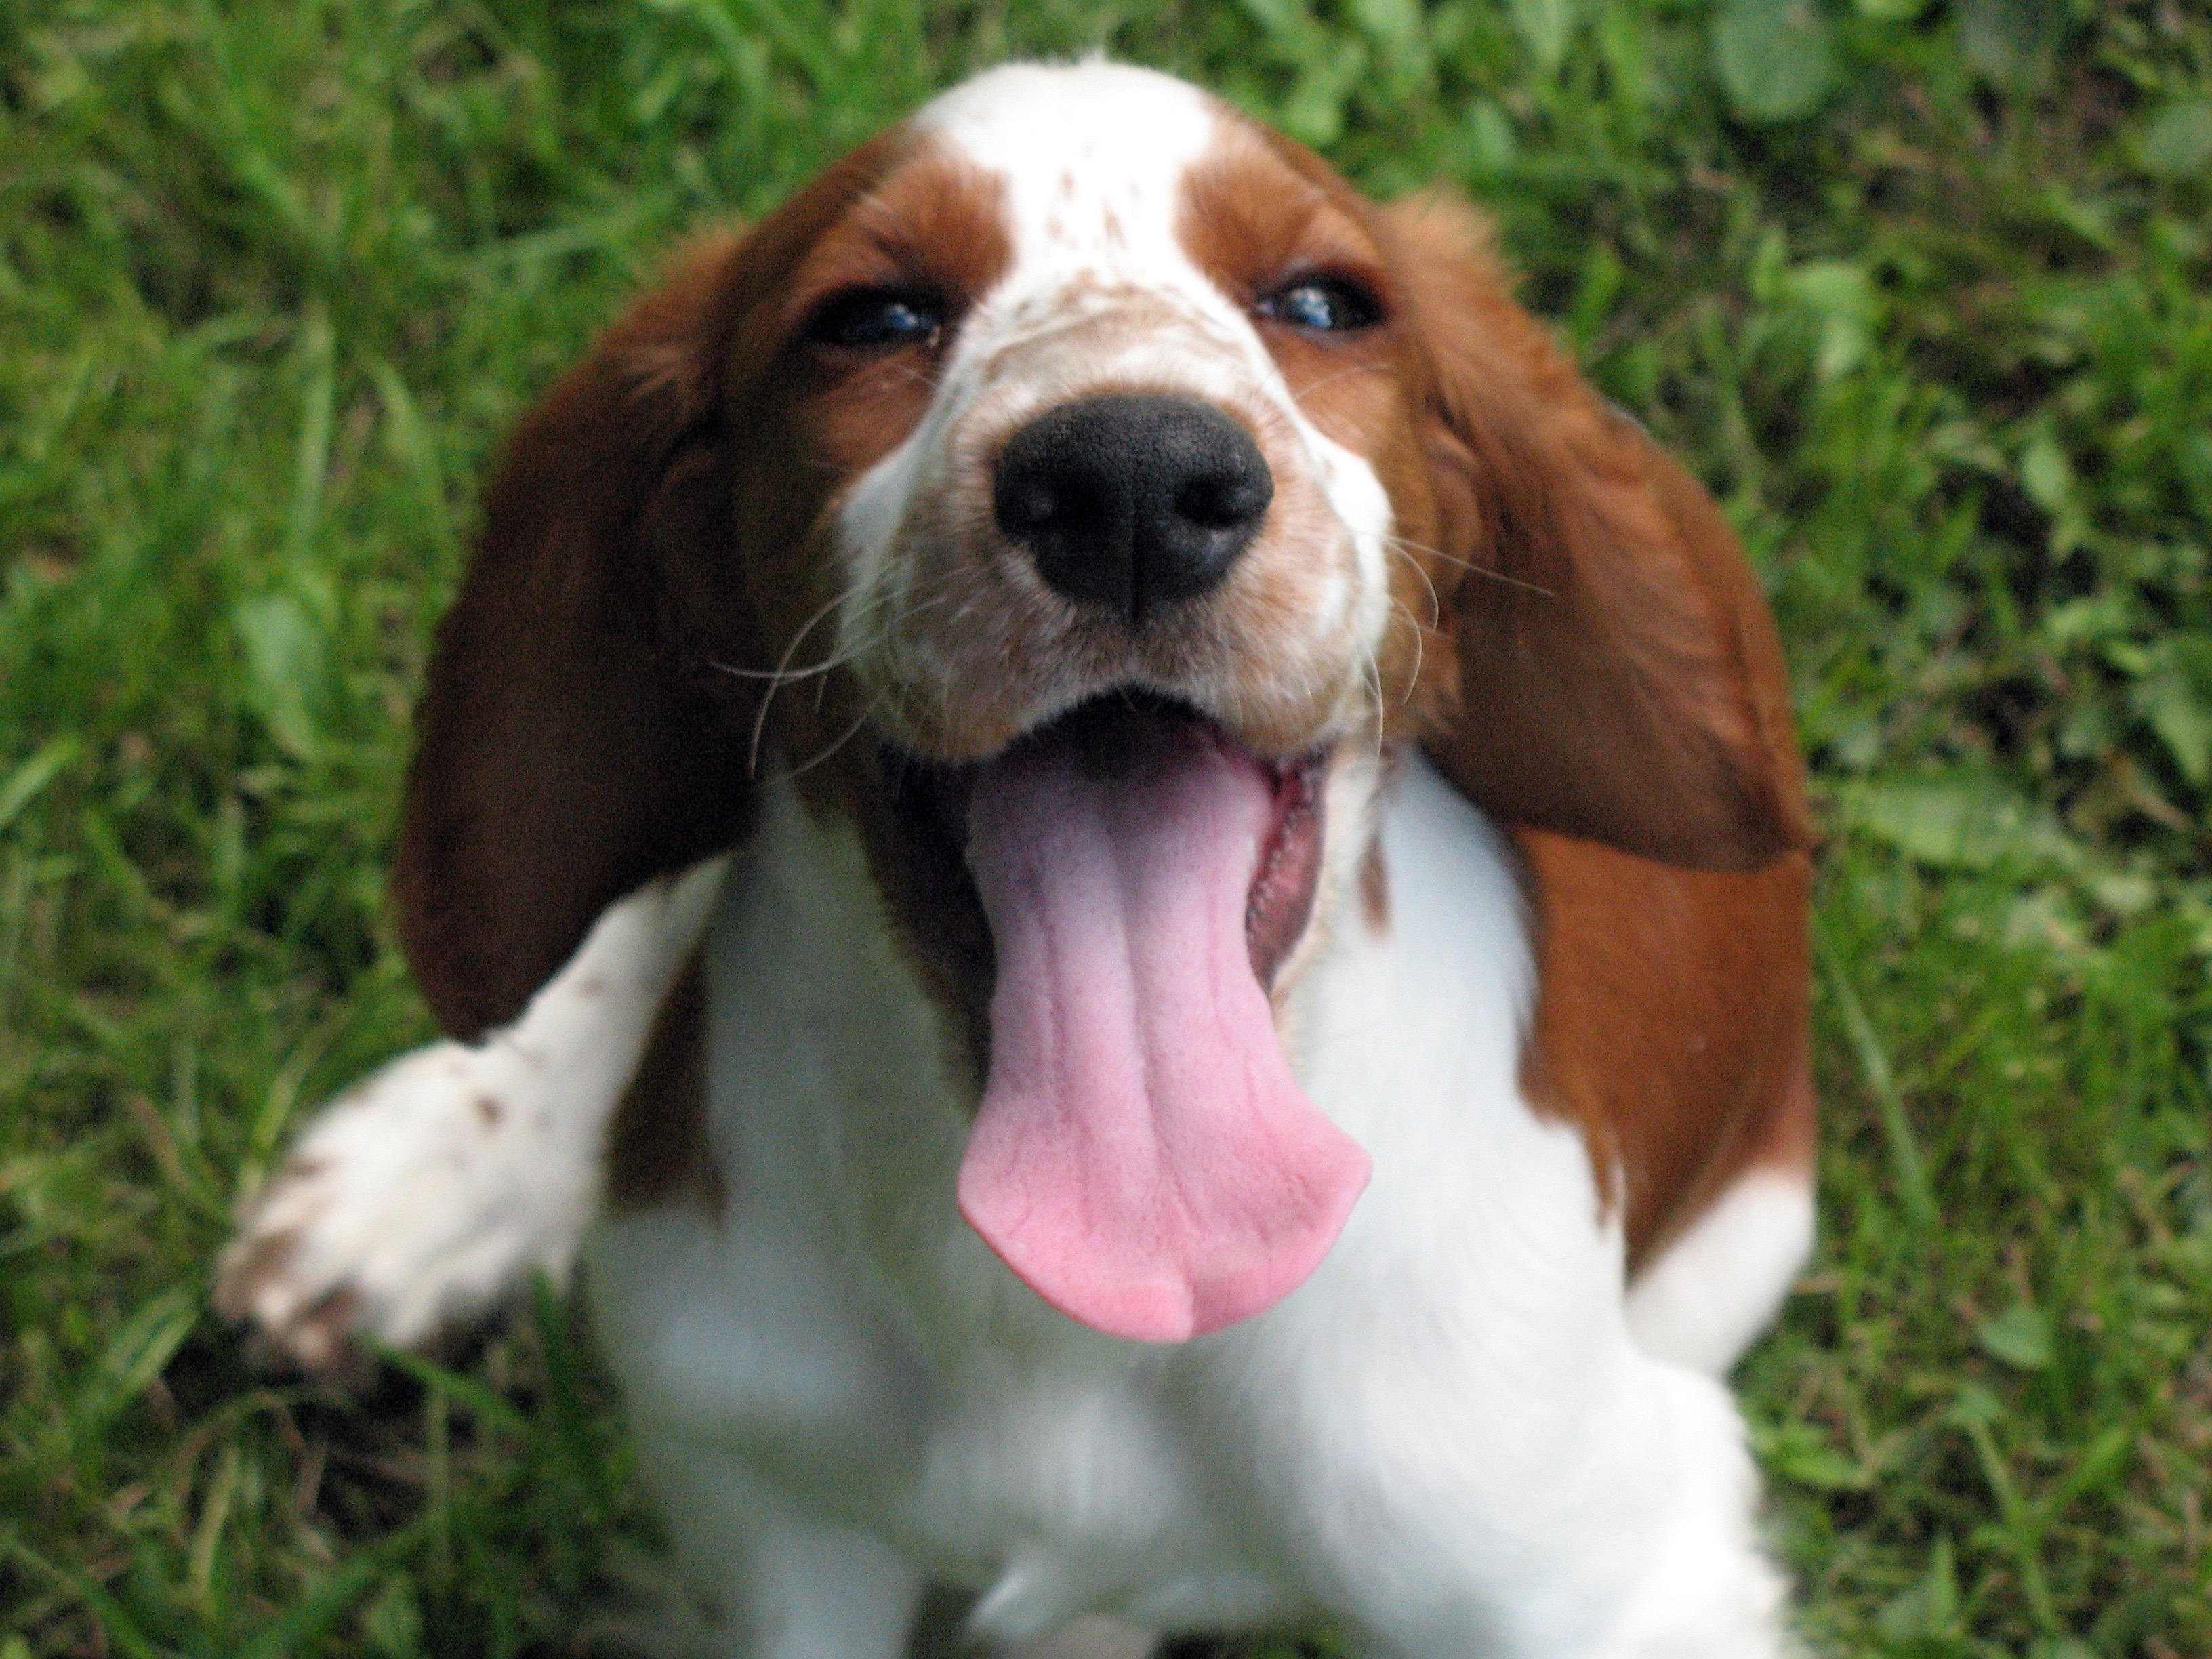 Welsh Springer Spaniel Breed Guide Learn About The Welsh Springer Spaniel